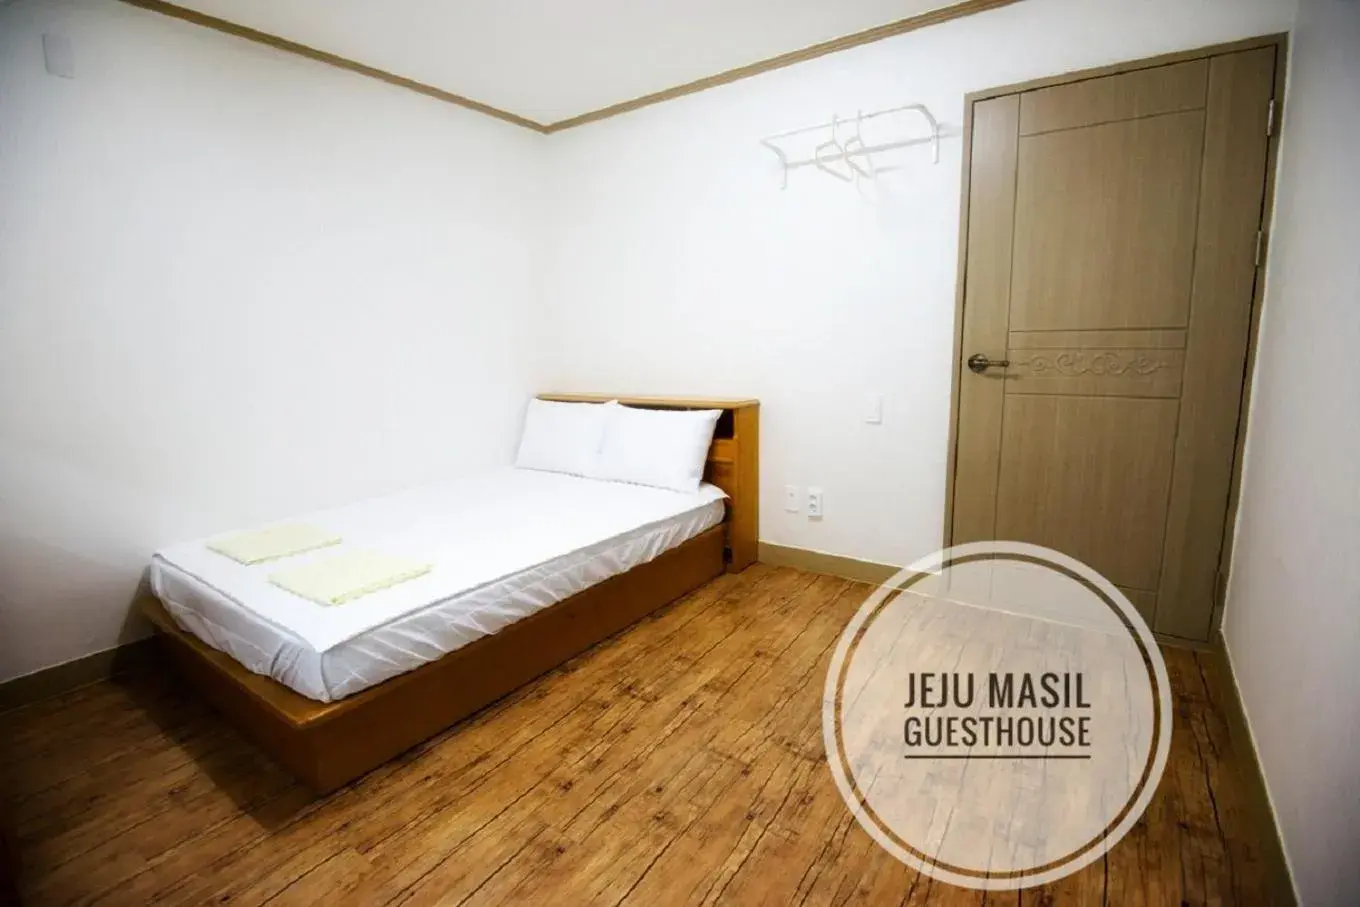 Bed in Masil Guesthouse Jeju